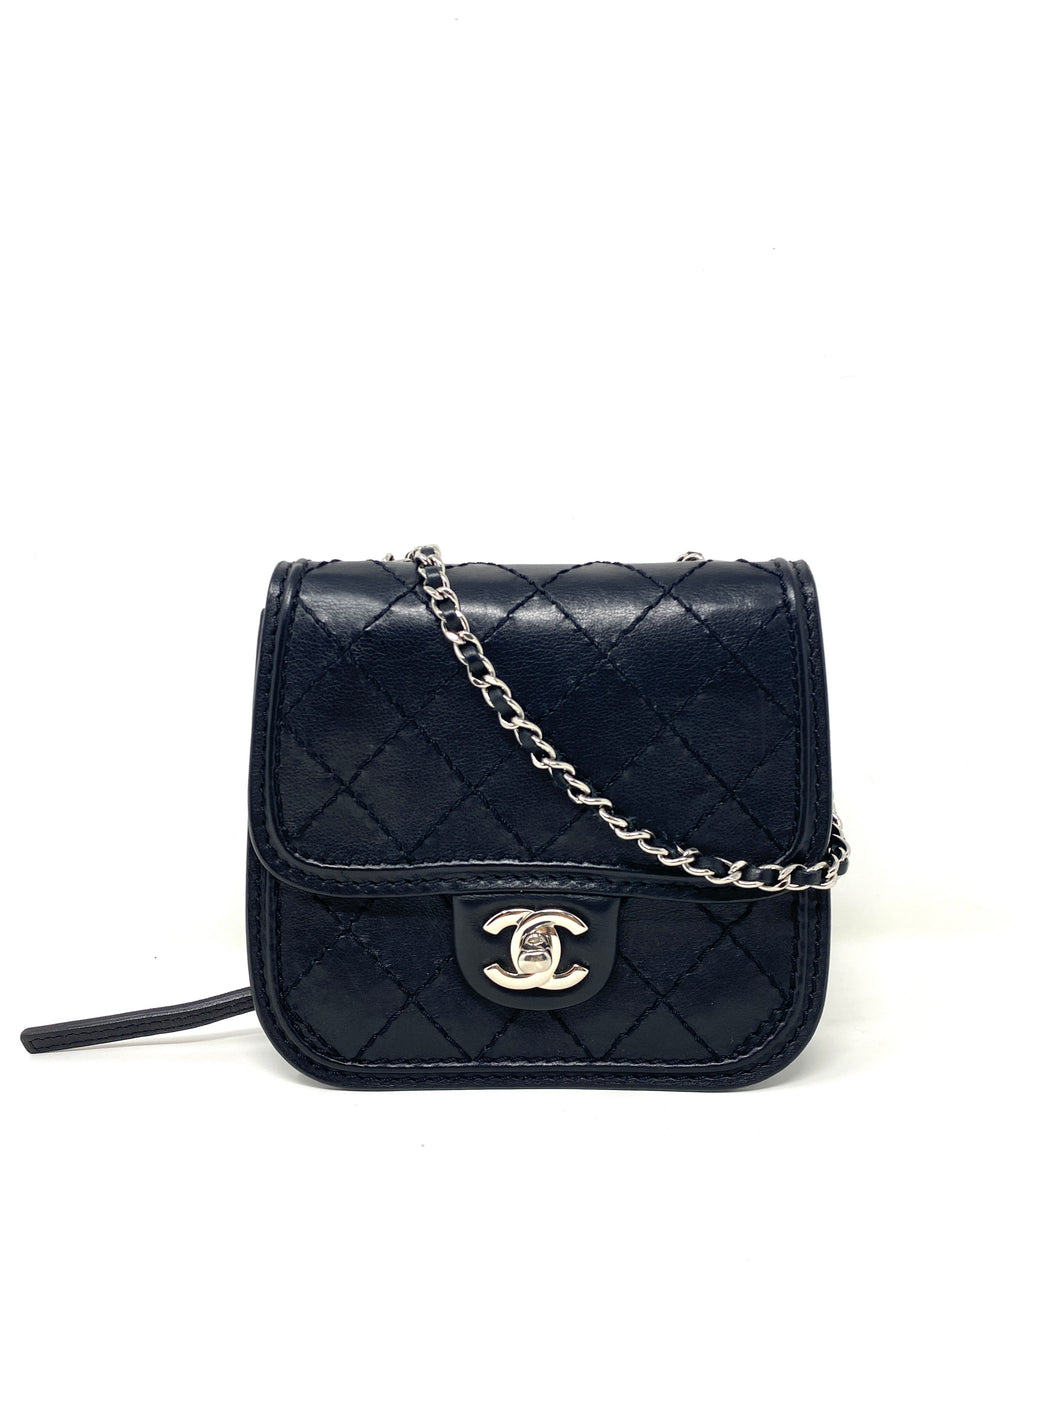 Chanel Limited Edition 2006 Cambon Patchwork Double Flap Bag - shop 